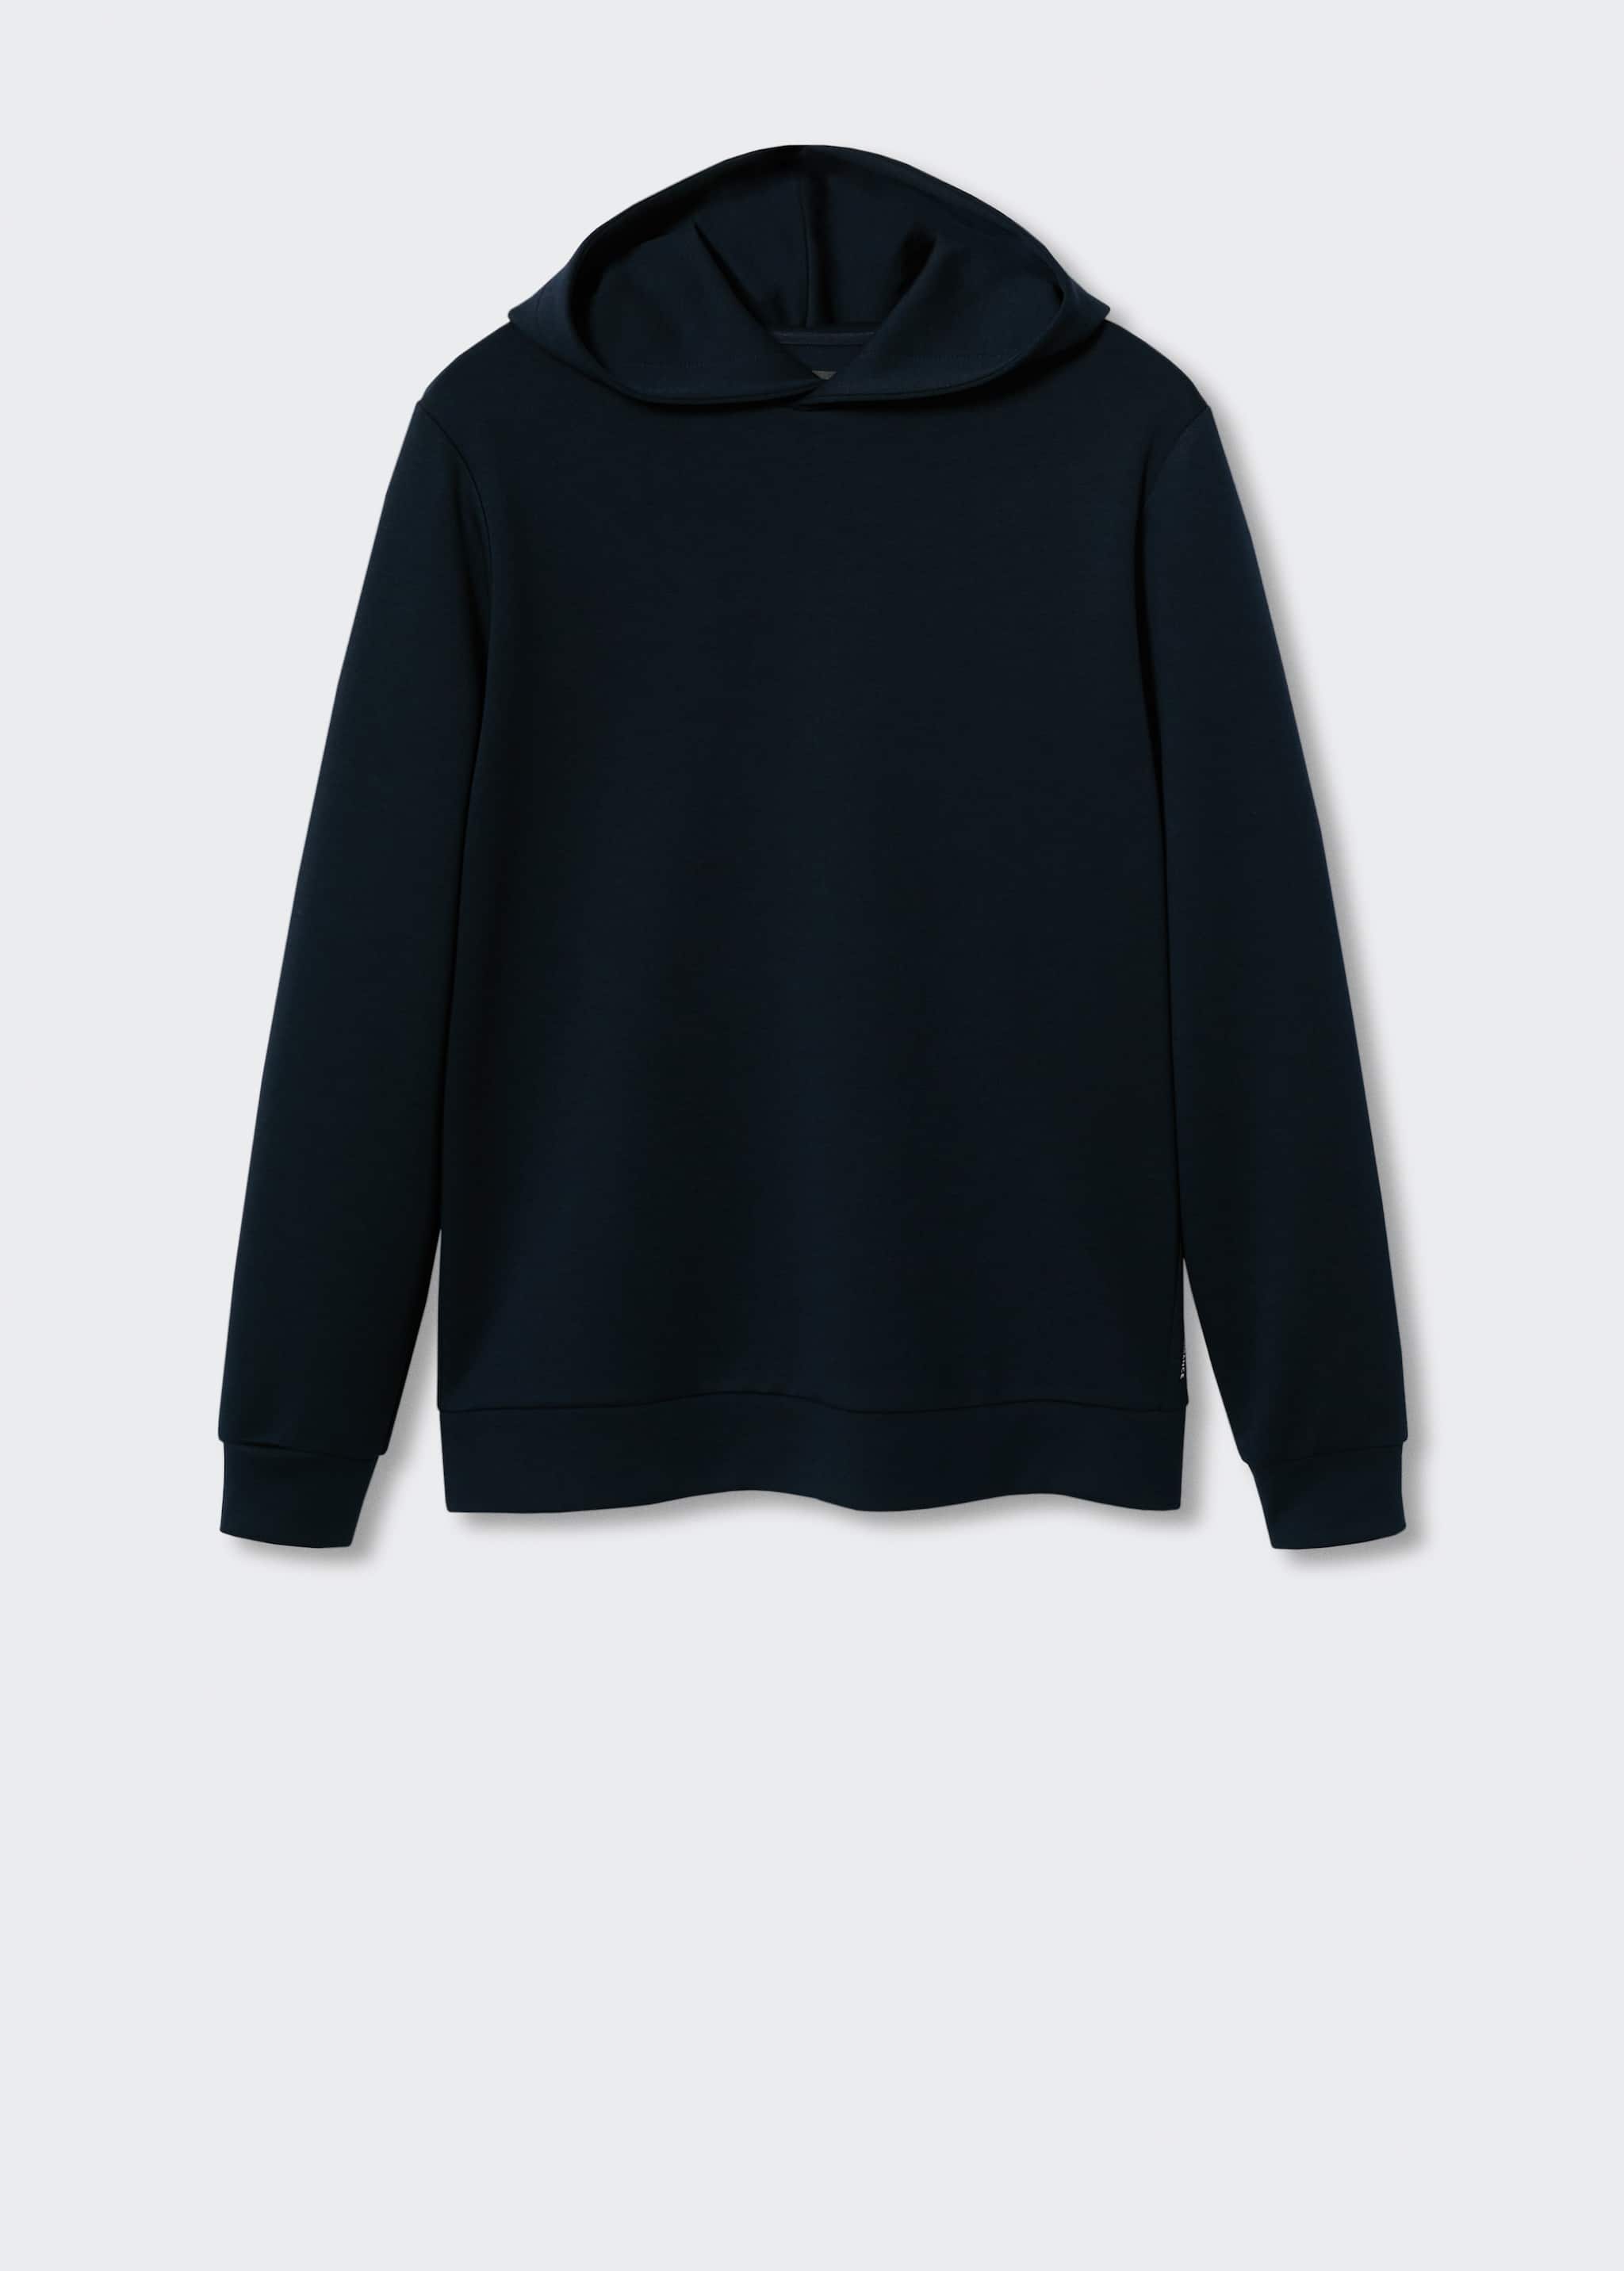 Hooded breathable sweatshirt - Article without model